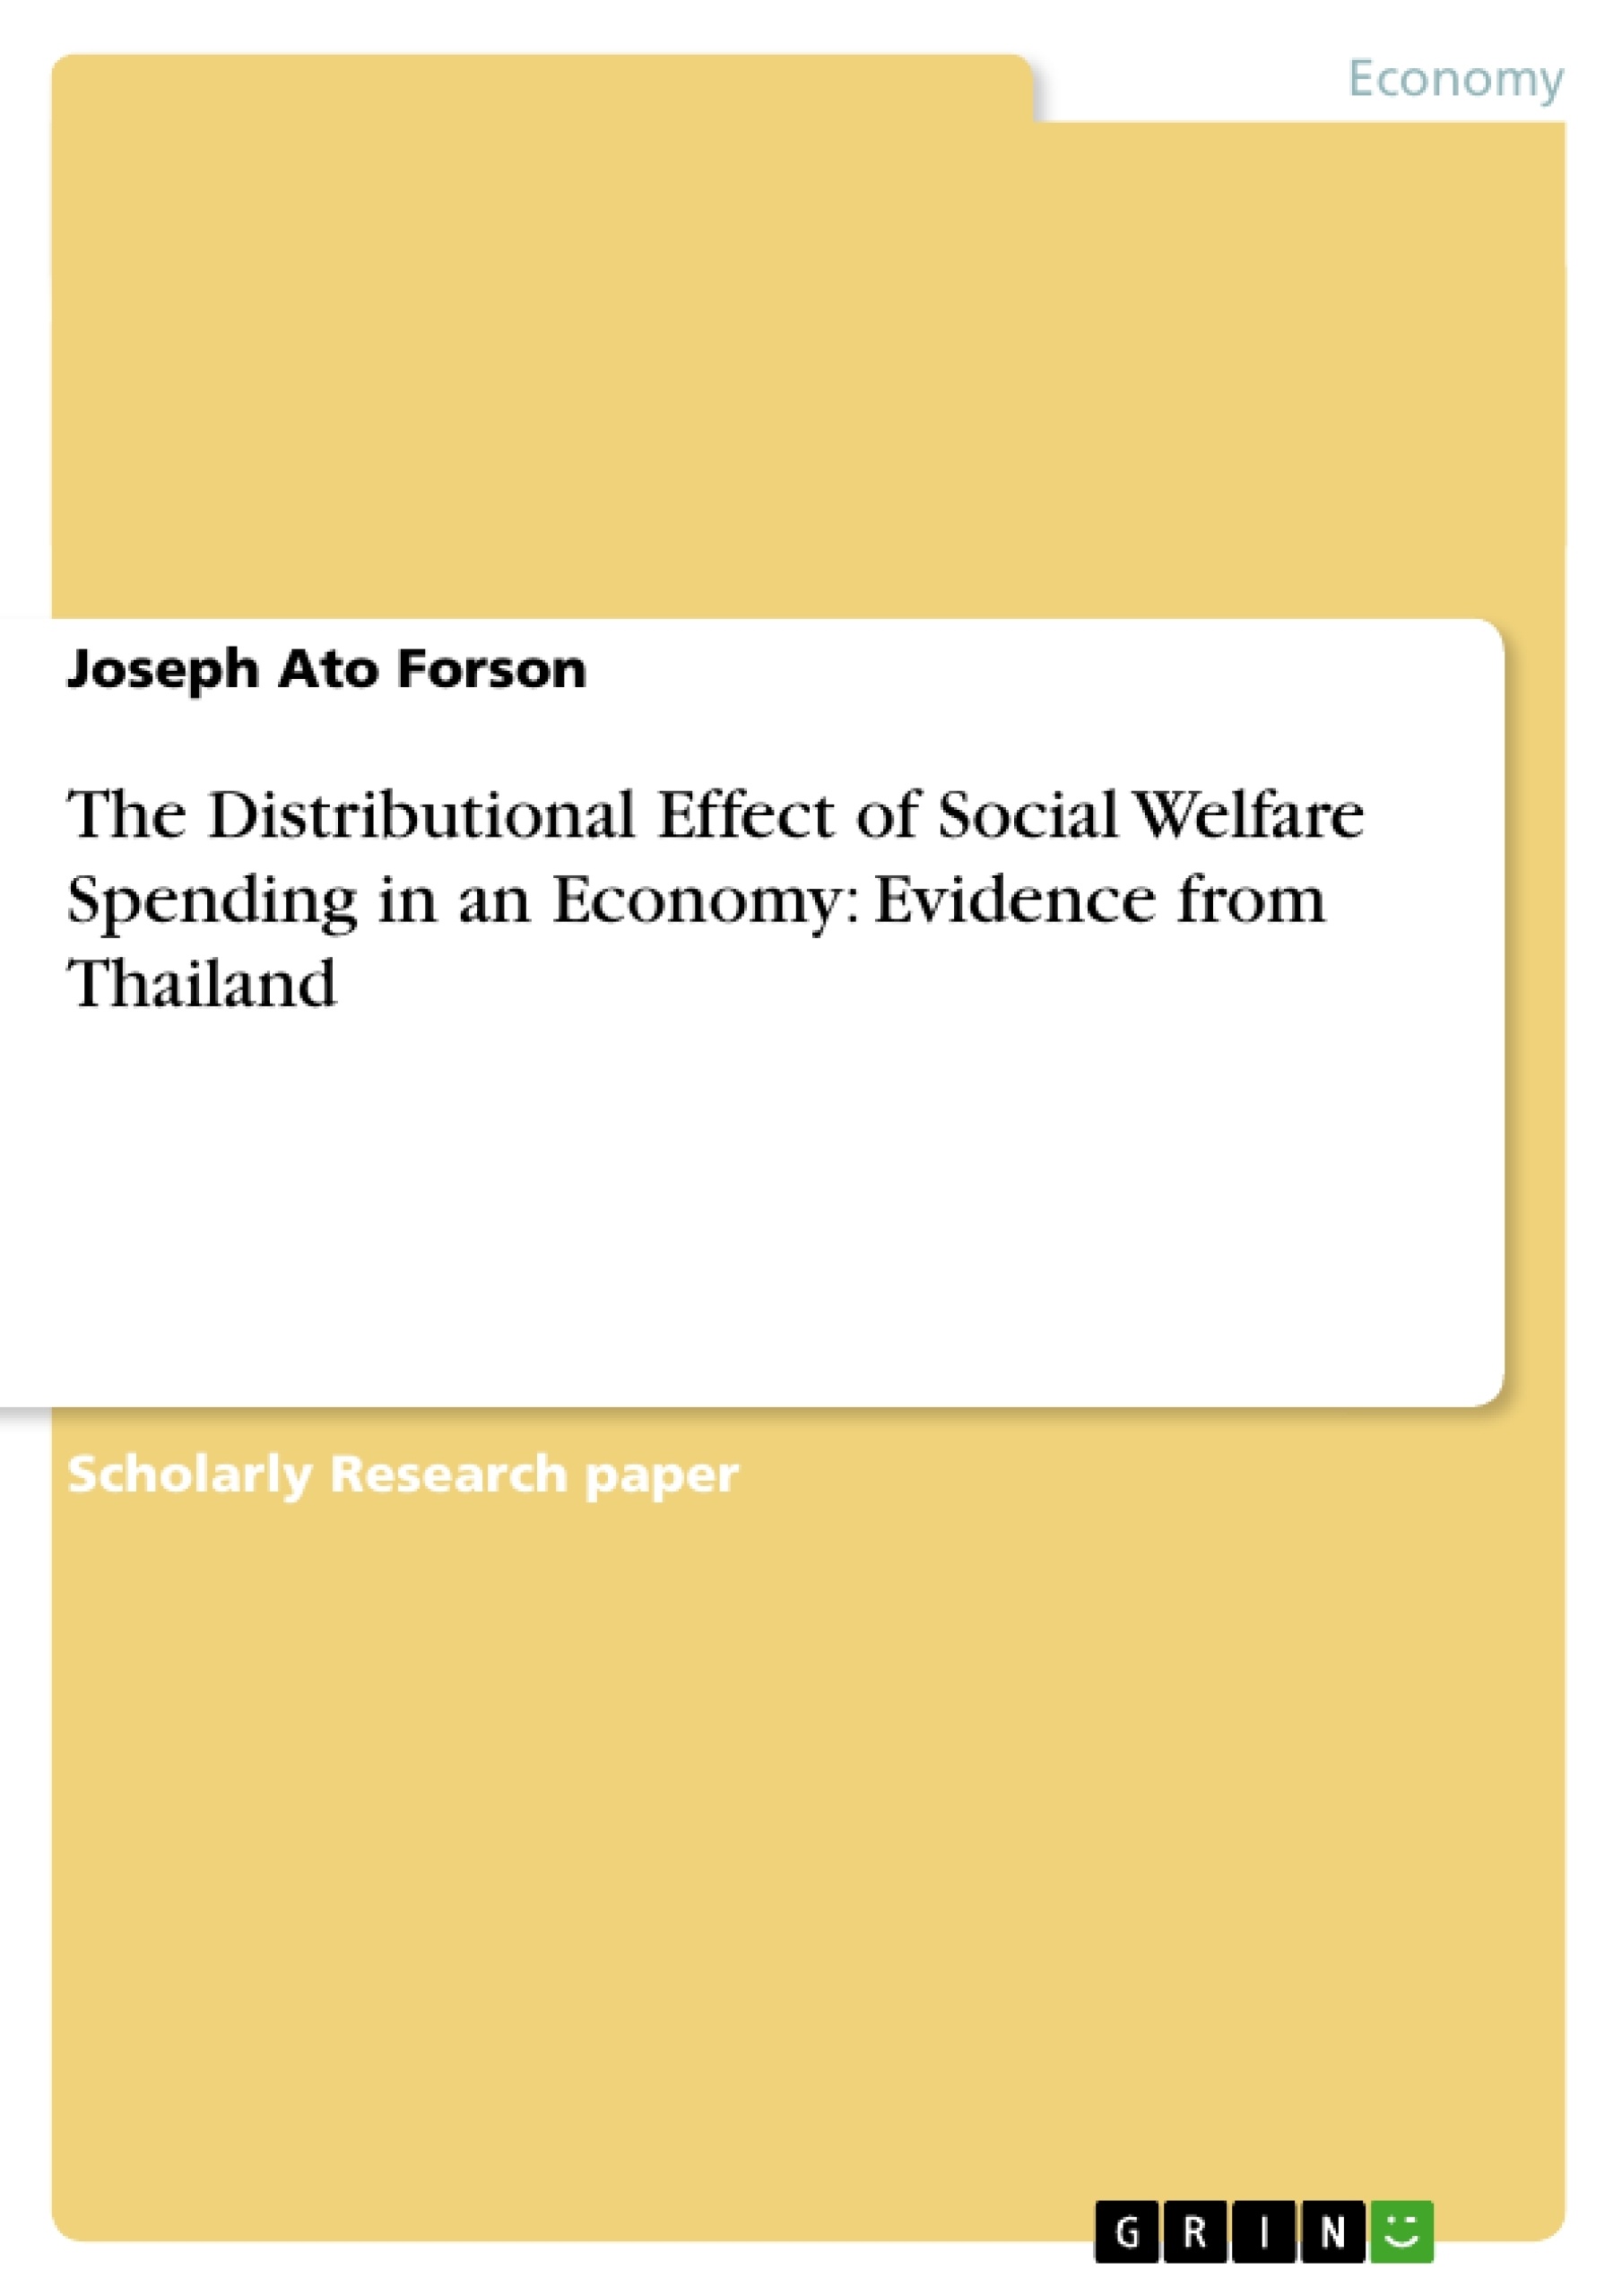 Titel: The Distributional Effect of Social Welfare Spending in an Economy: Evidence from Thailand